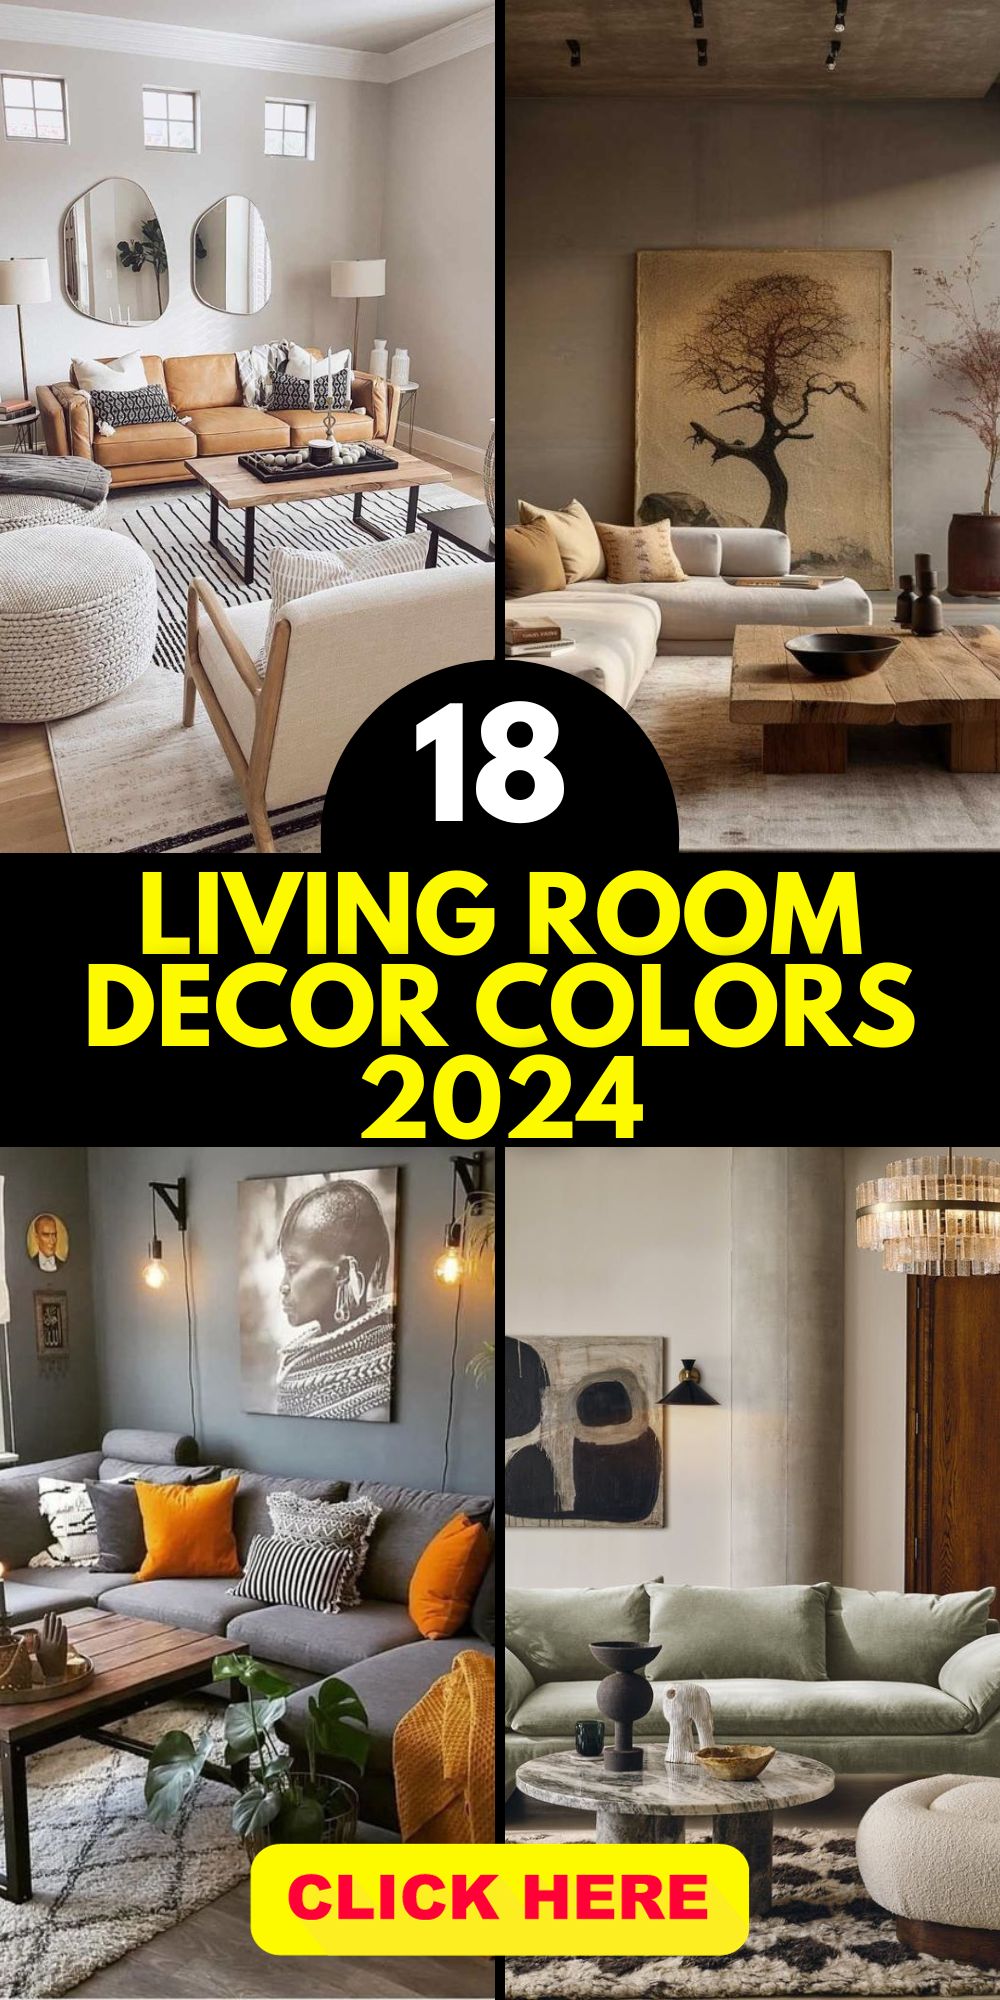 Living Room Decor Colors For 2024: From Warm Hues To Eclectic Mixes In ...